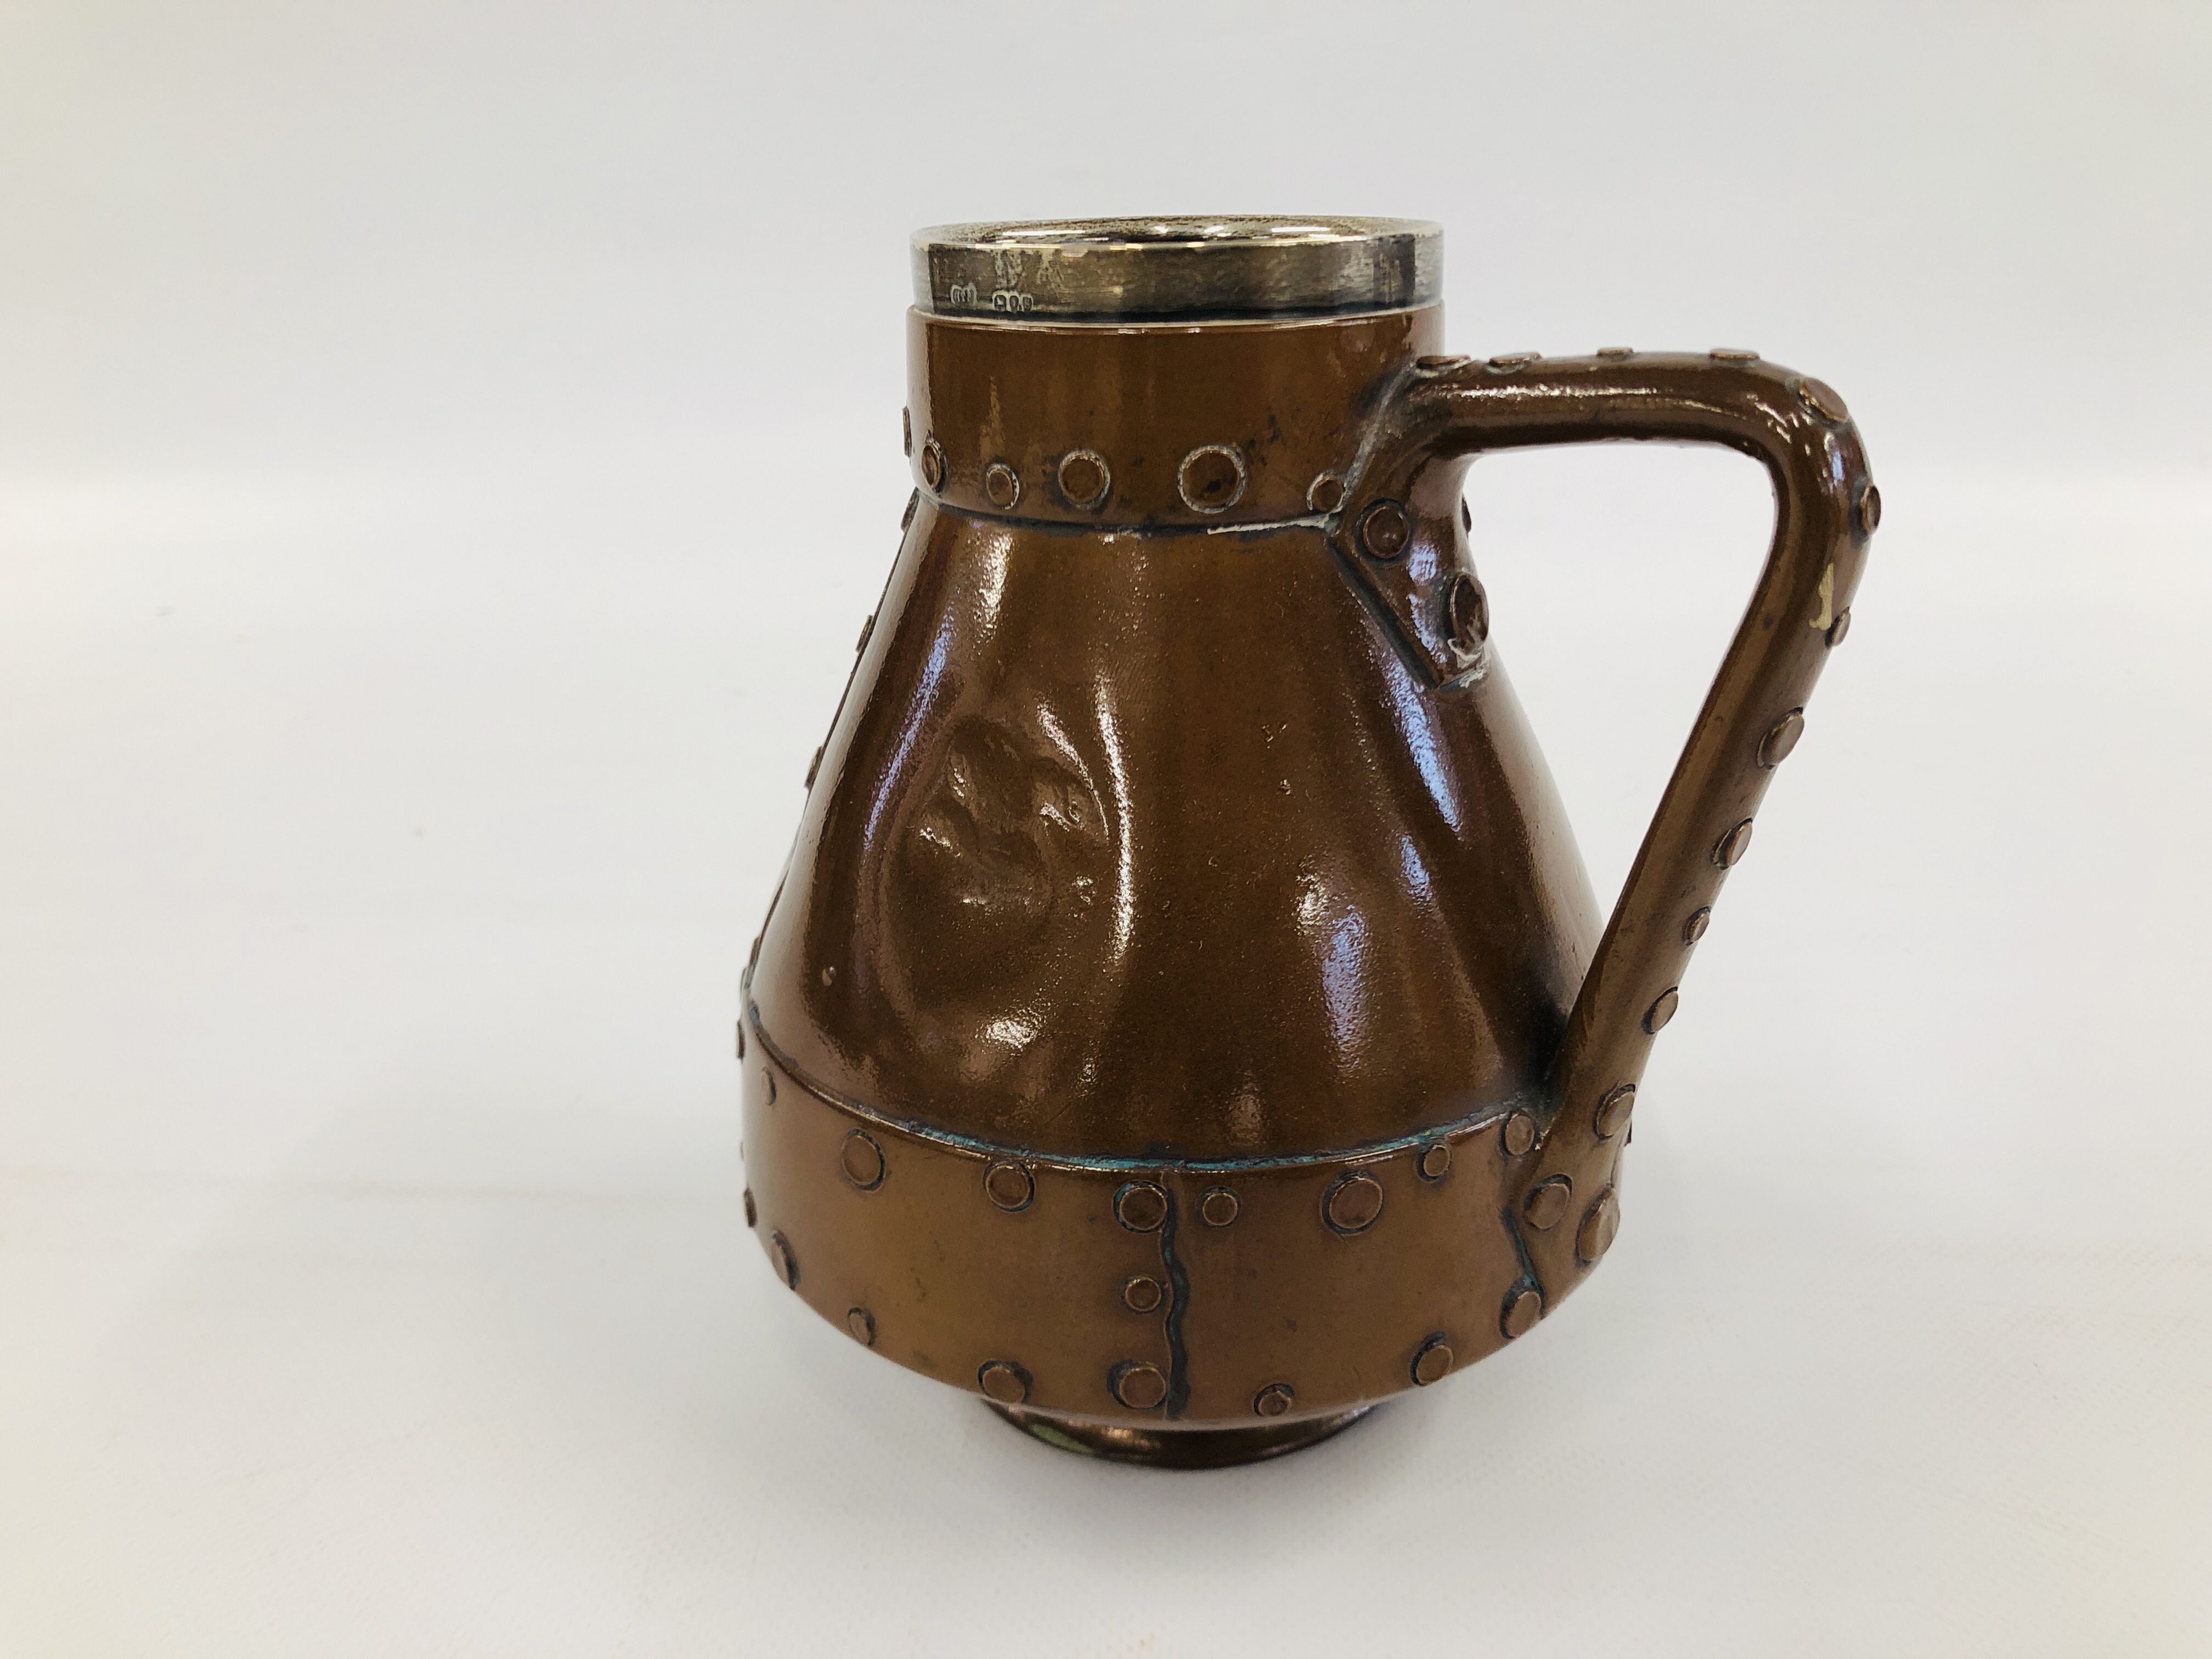 A DOULTON LAMBETH ARTS & CRAFT SILICON ENGLAND 9281 JUG IN THE GLAZED COPPER STYLE WITH SILVER RIM - Image 4 of 7